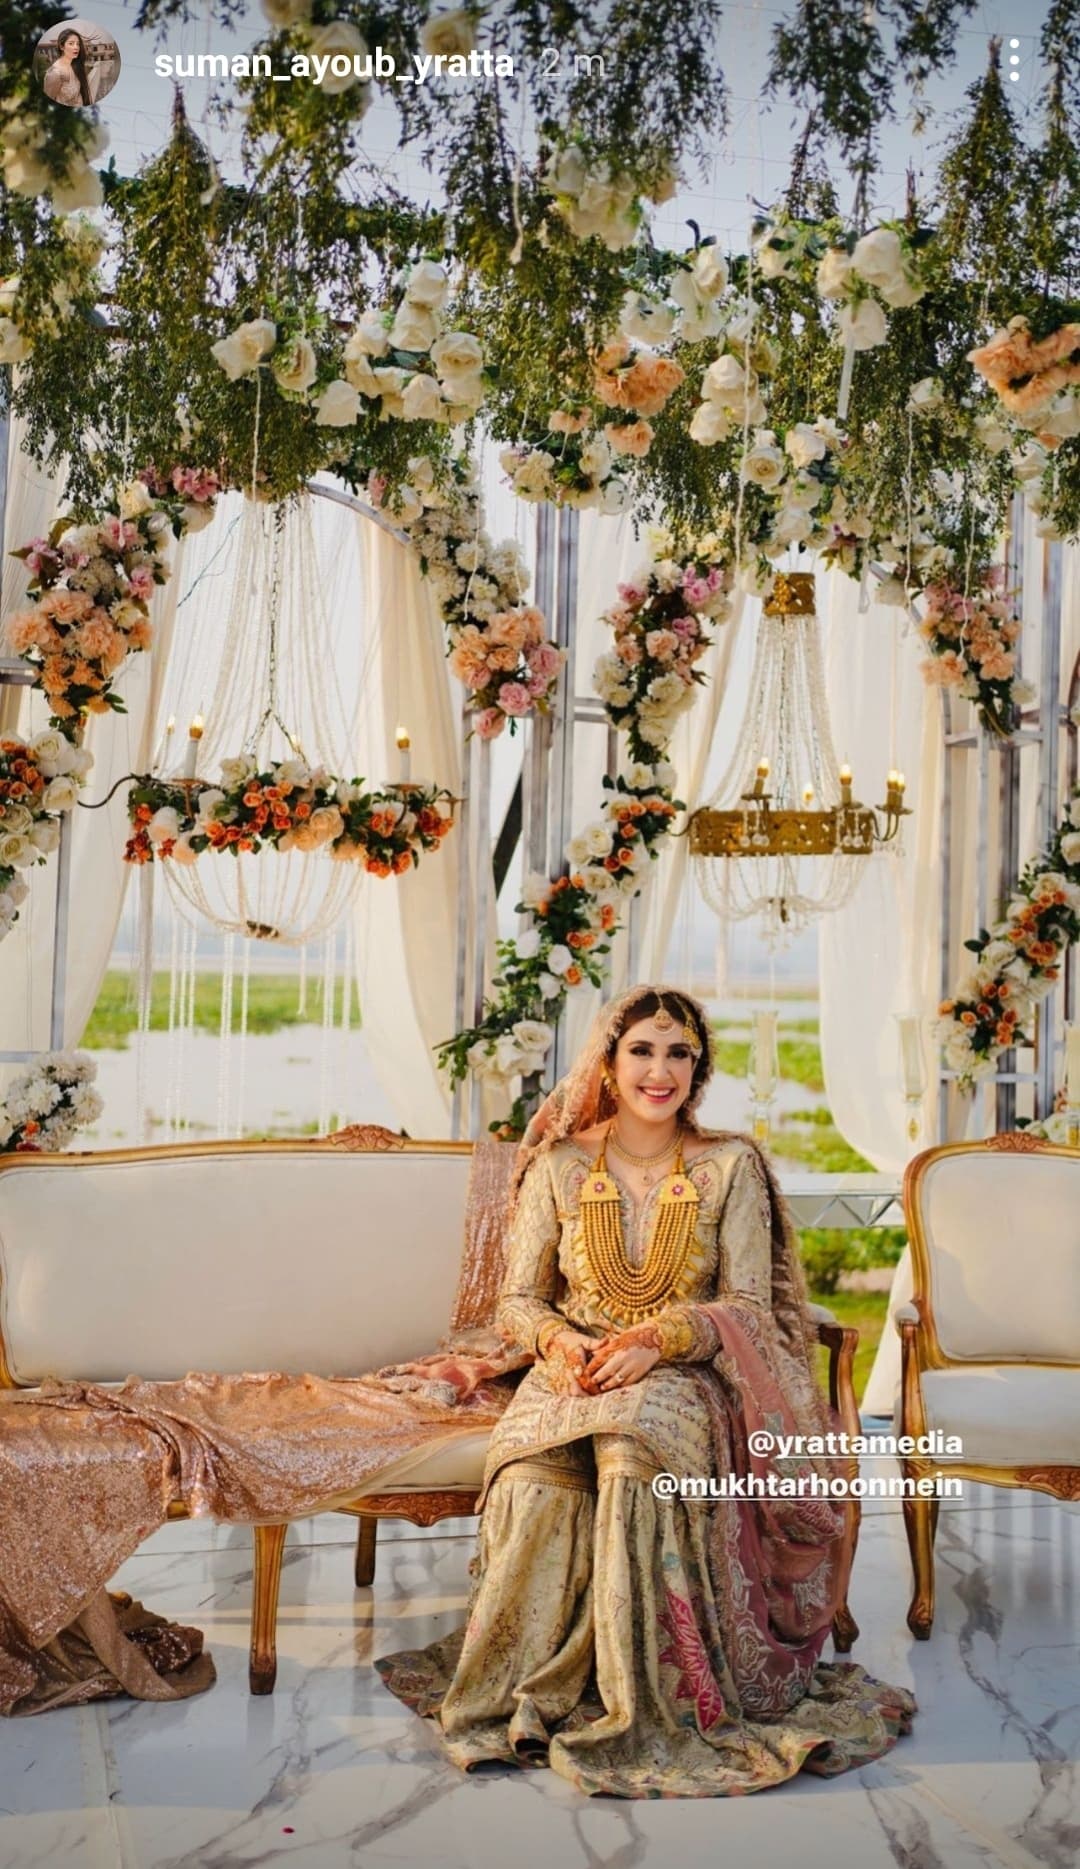 In Pictures: A glimpse into Usman Mukhtar  & Zunaira Inaam’s dreamy wedding